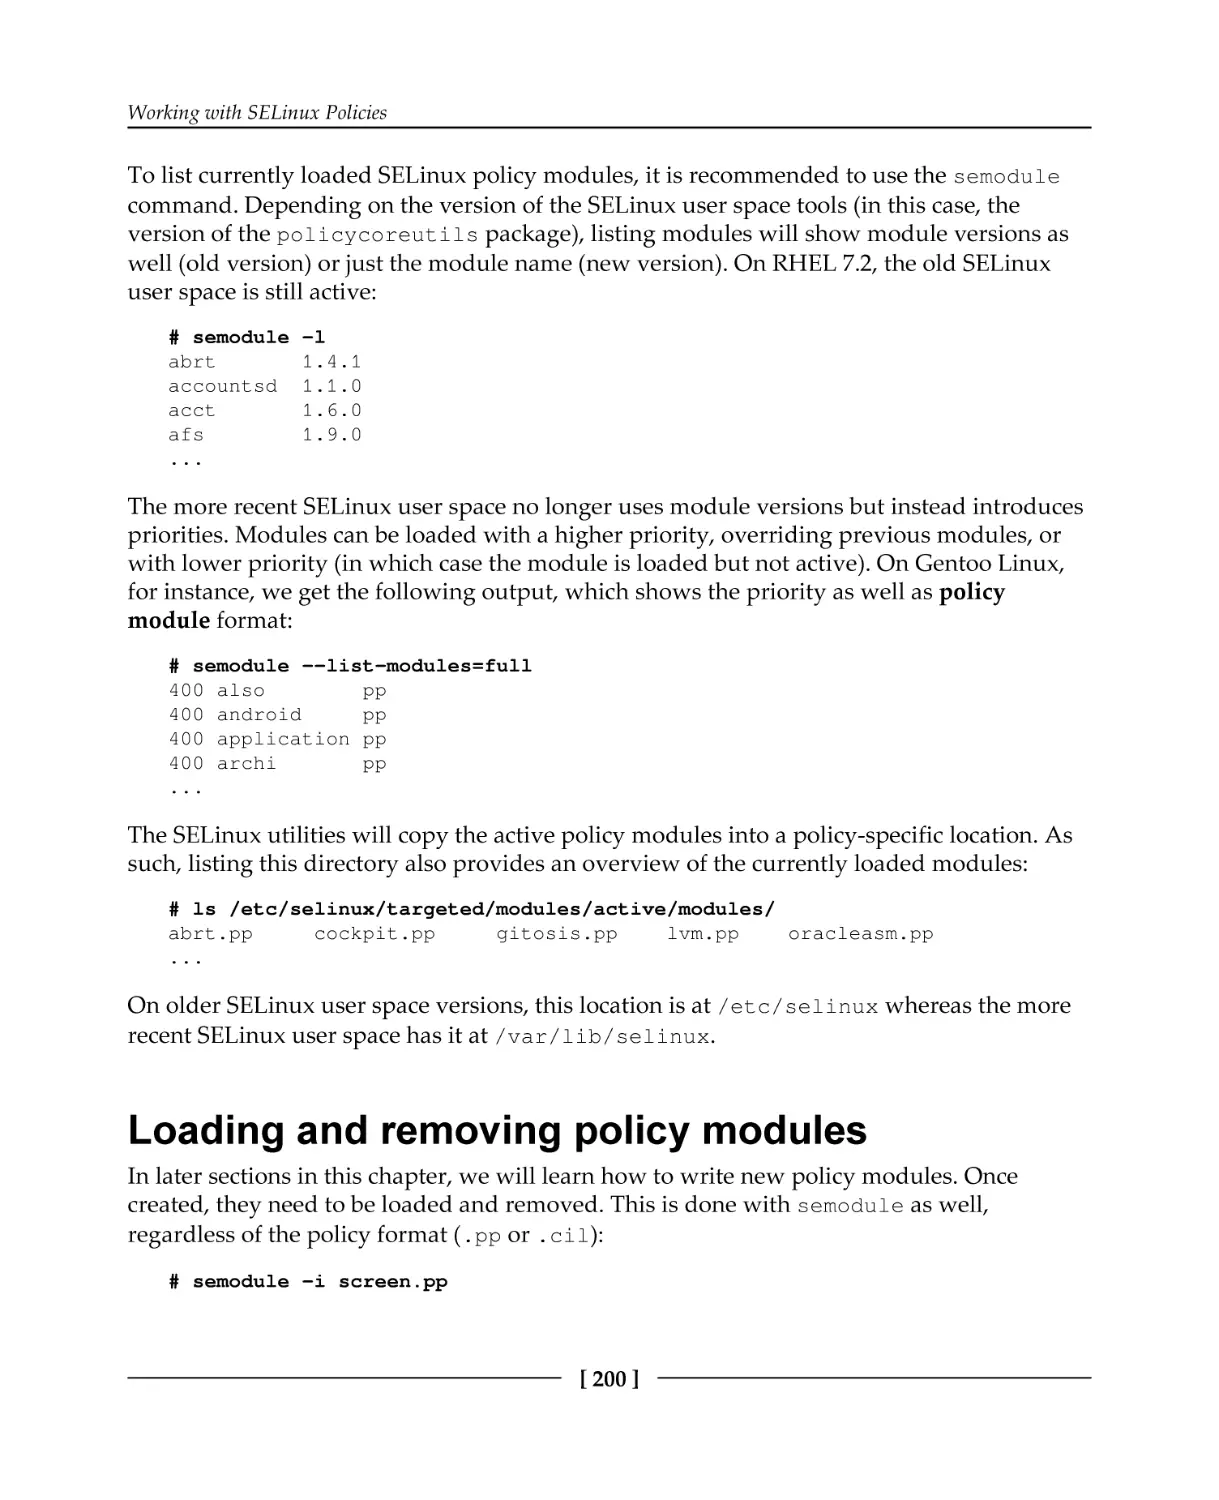 Loading and removing policy modules